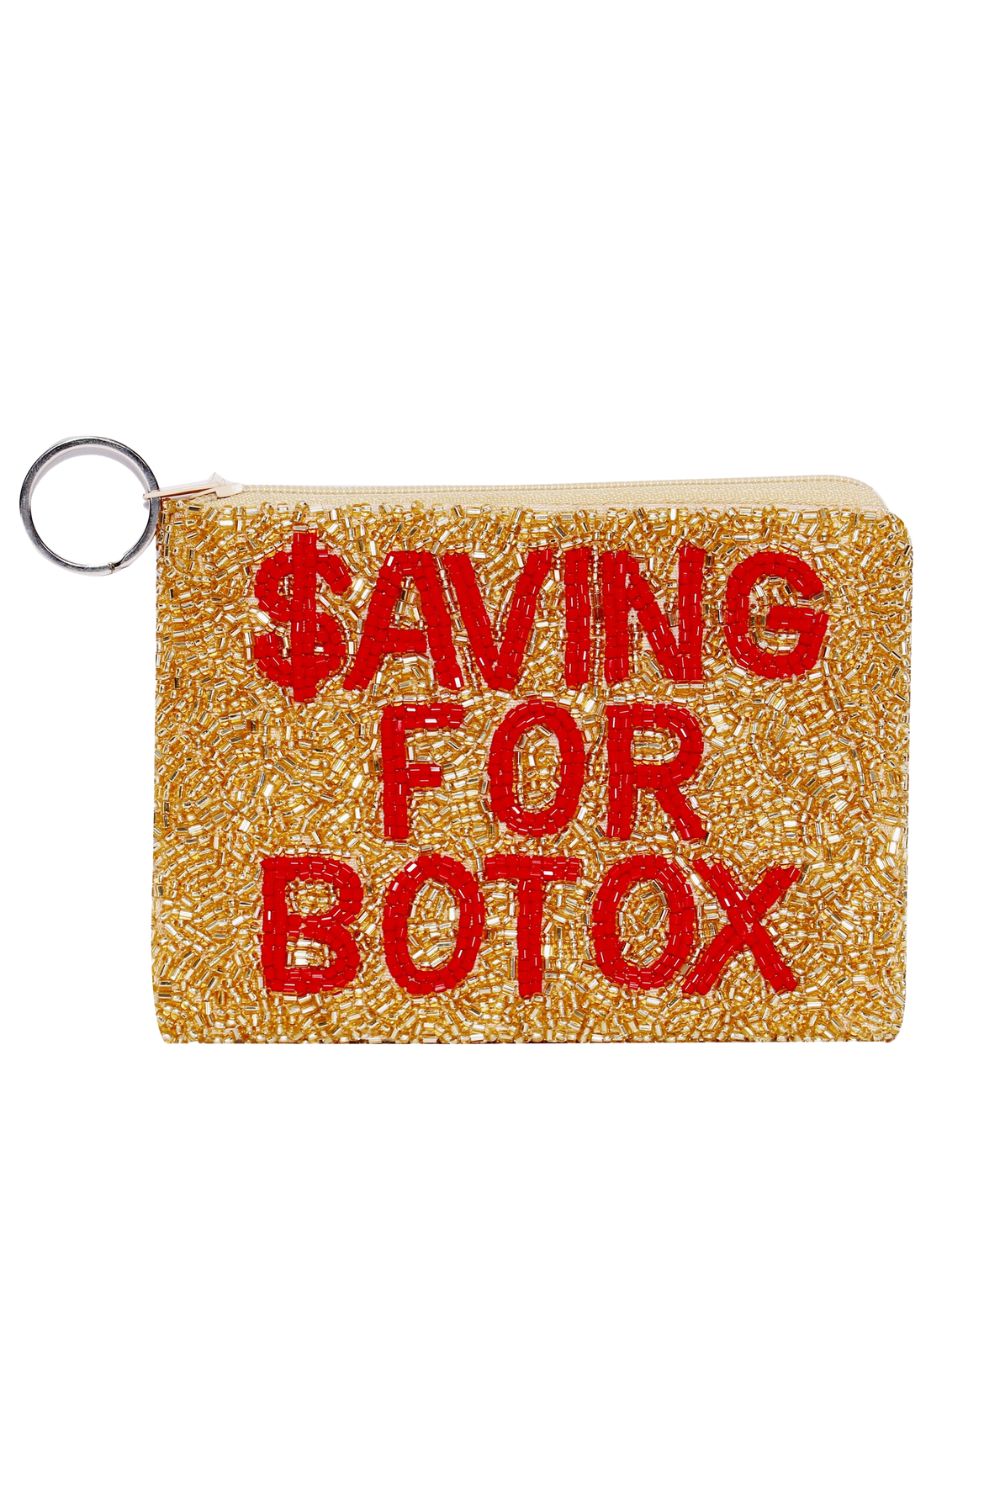 $AVING FOR BOTOX KEYCHAIN WALLET